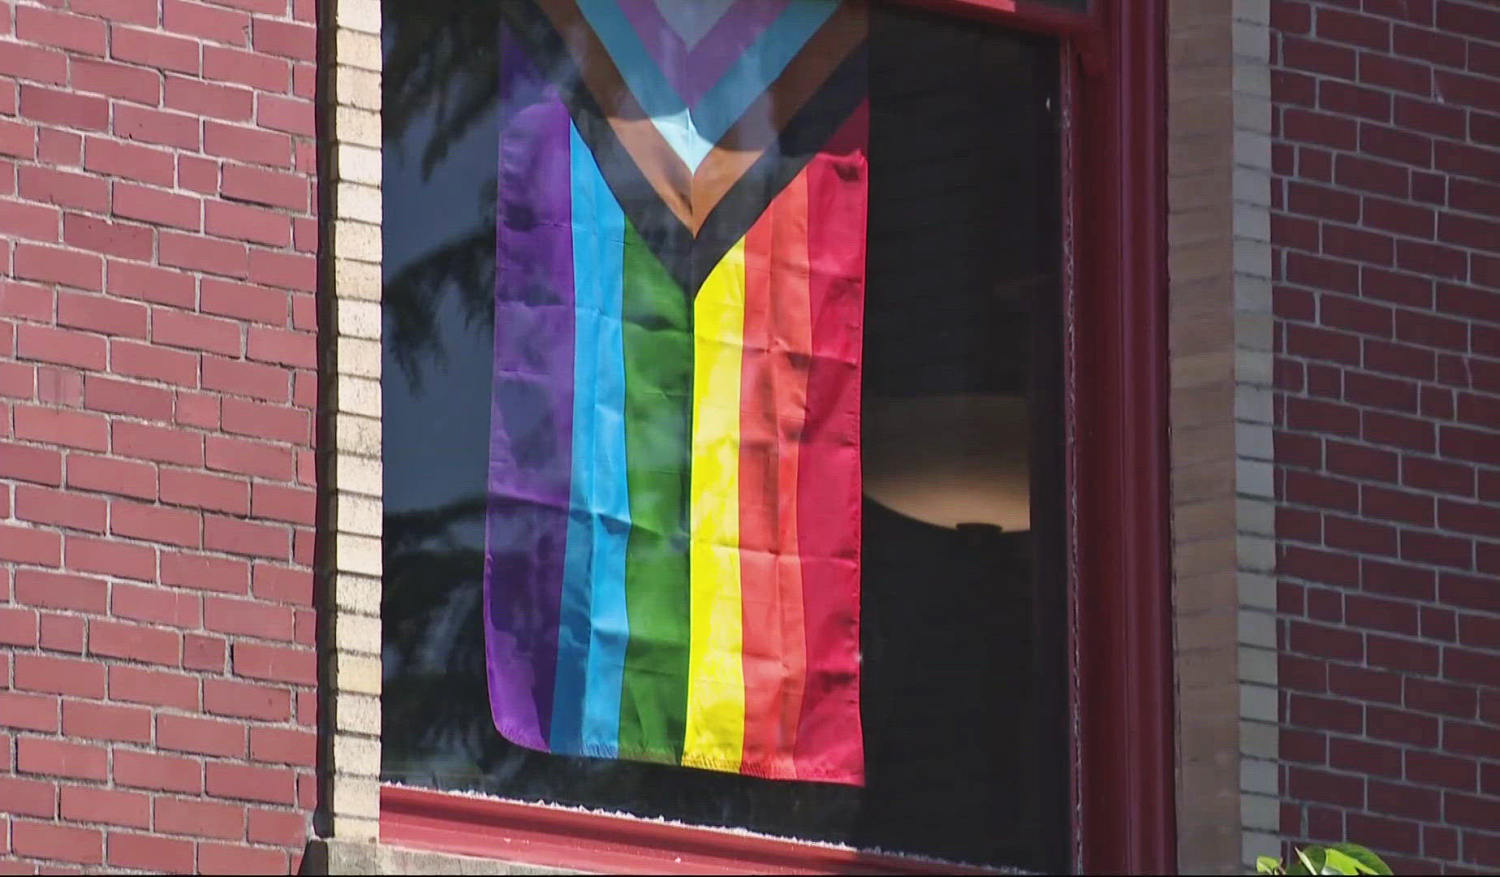 Oregon library shot at with pellet gun after displaying pride flag, police say